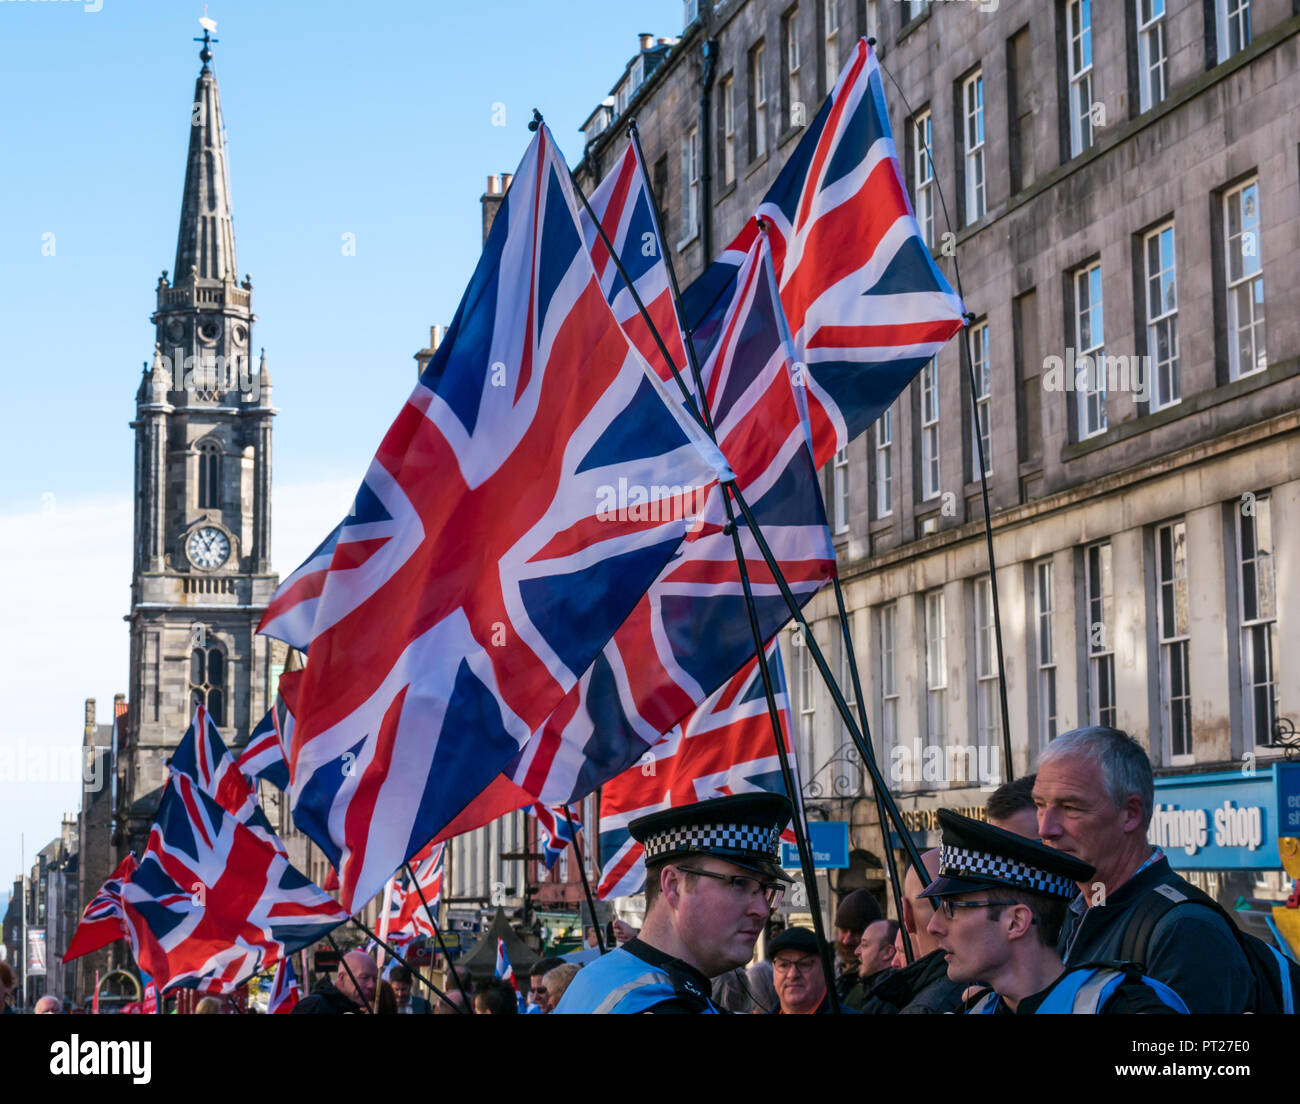 Holyrood, Edinburgh, Scotland, United Kingdom, 6th October 2018. All Under One Banner (AUOB) Scottish March and Rally for Independence, with supporters walking down the Royal Mile to Holyrood Park for a rally. AOUB is a pro-independence campaign for whose core aim is to march at regular intervals until Scotland achieves independence. Pro Union supporters on the Royal Mile wave Union Jacks with Tron Kirk spire in background Stock Photo